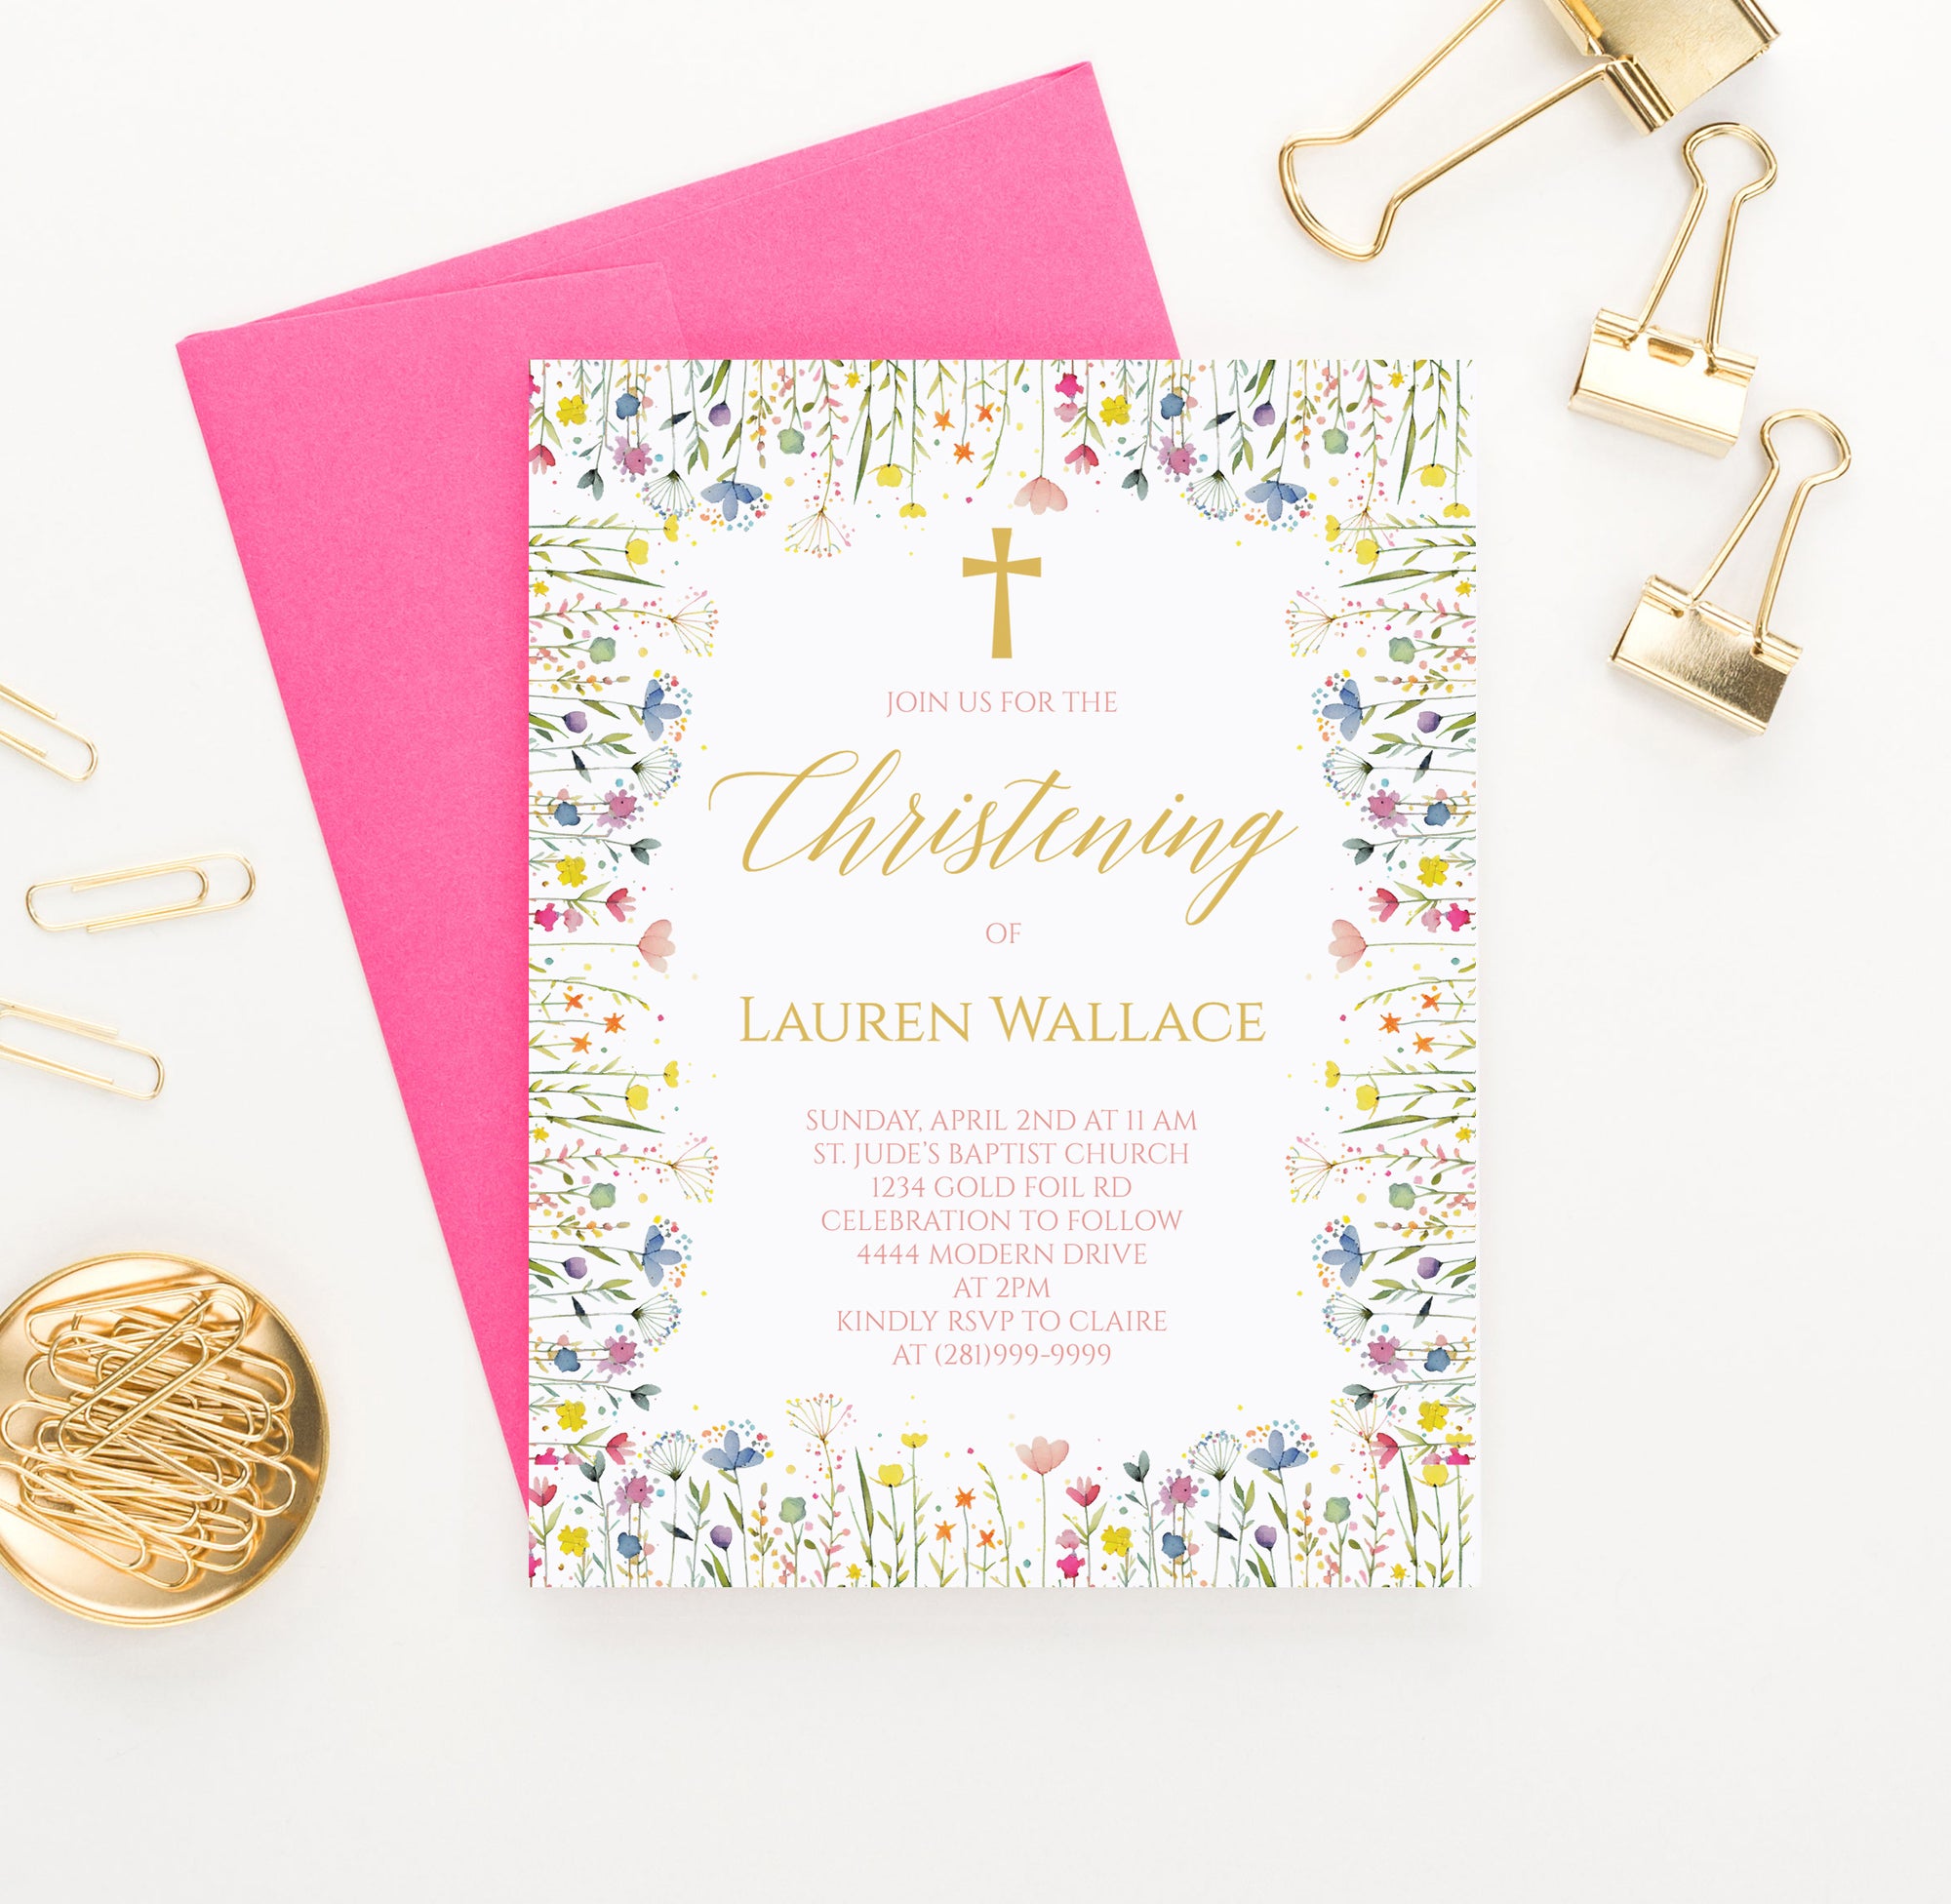 Colorful Christening Party Invitations With Watercolor Wildflowers